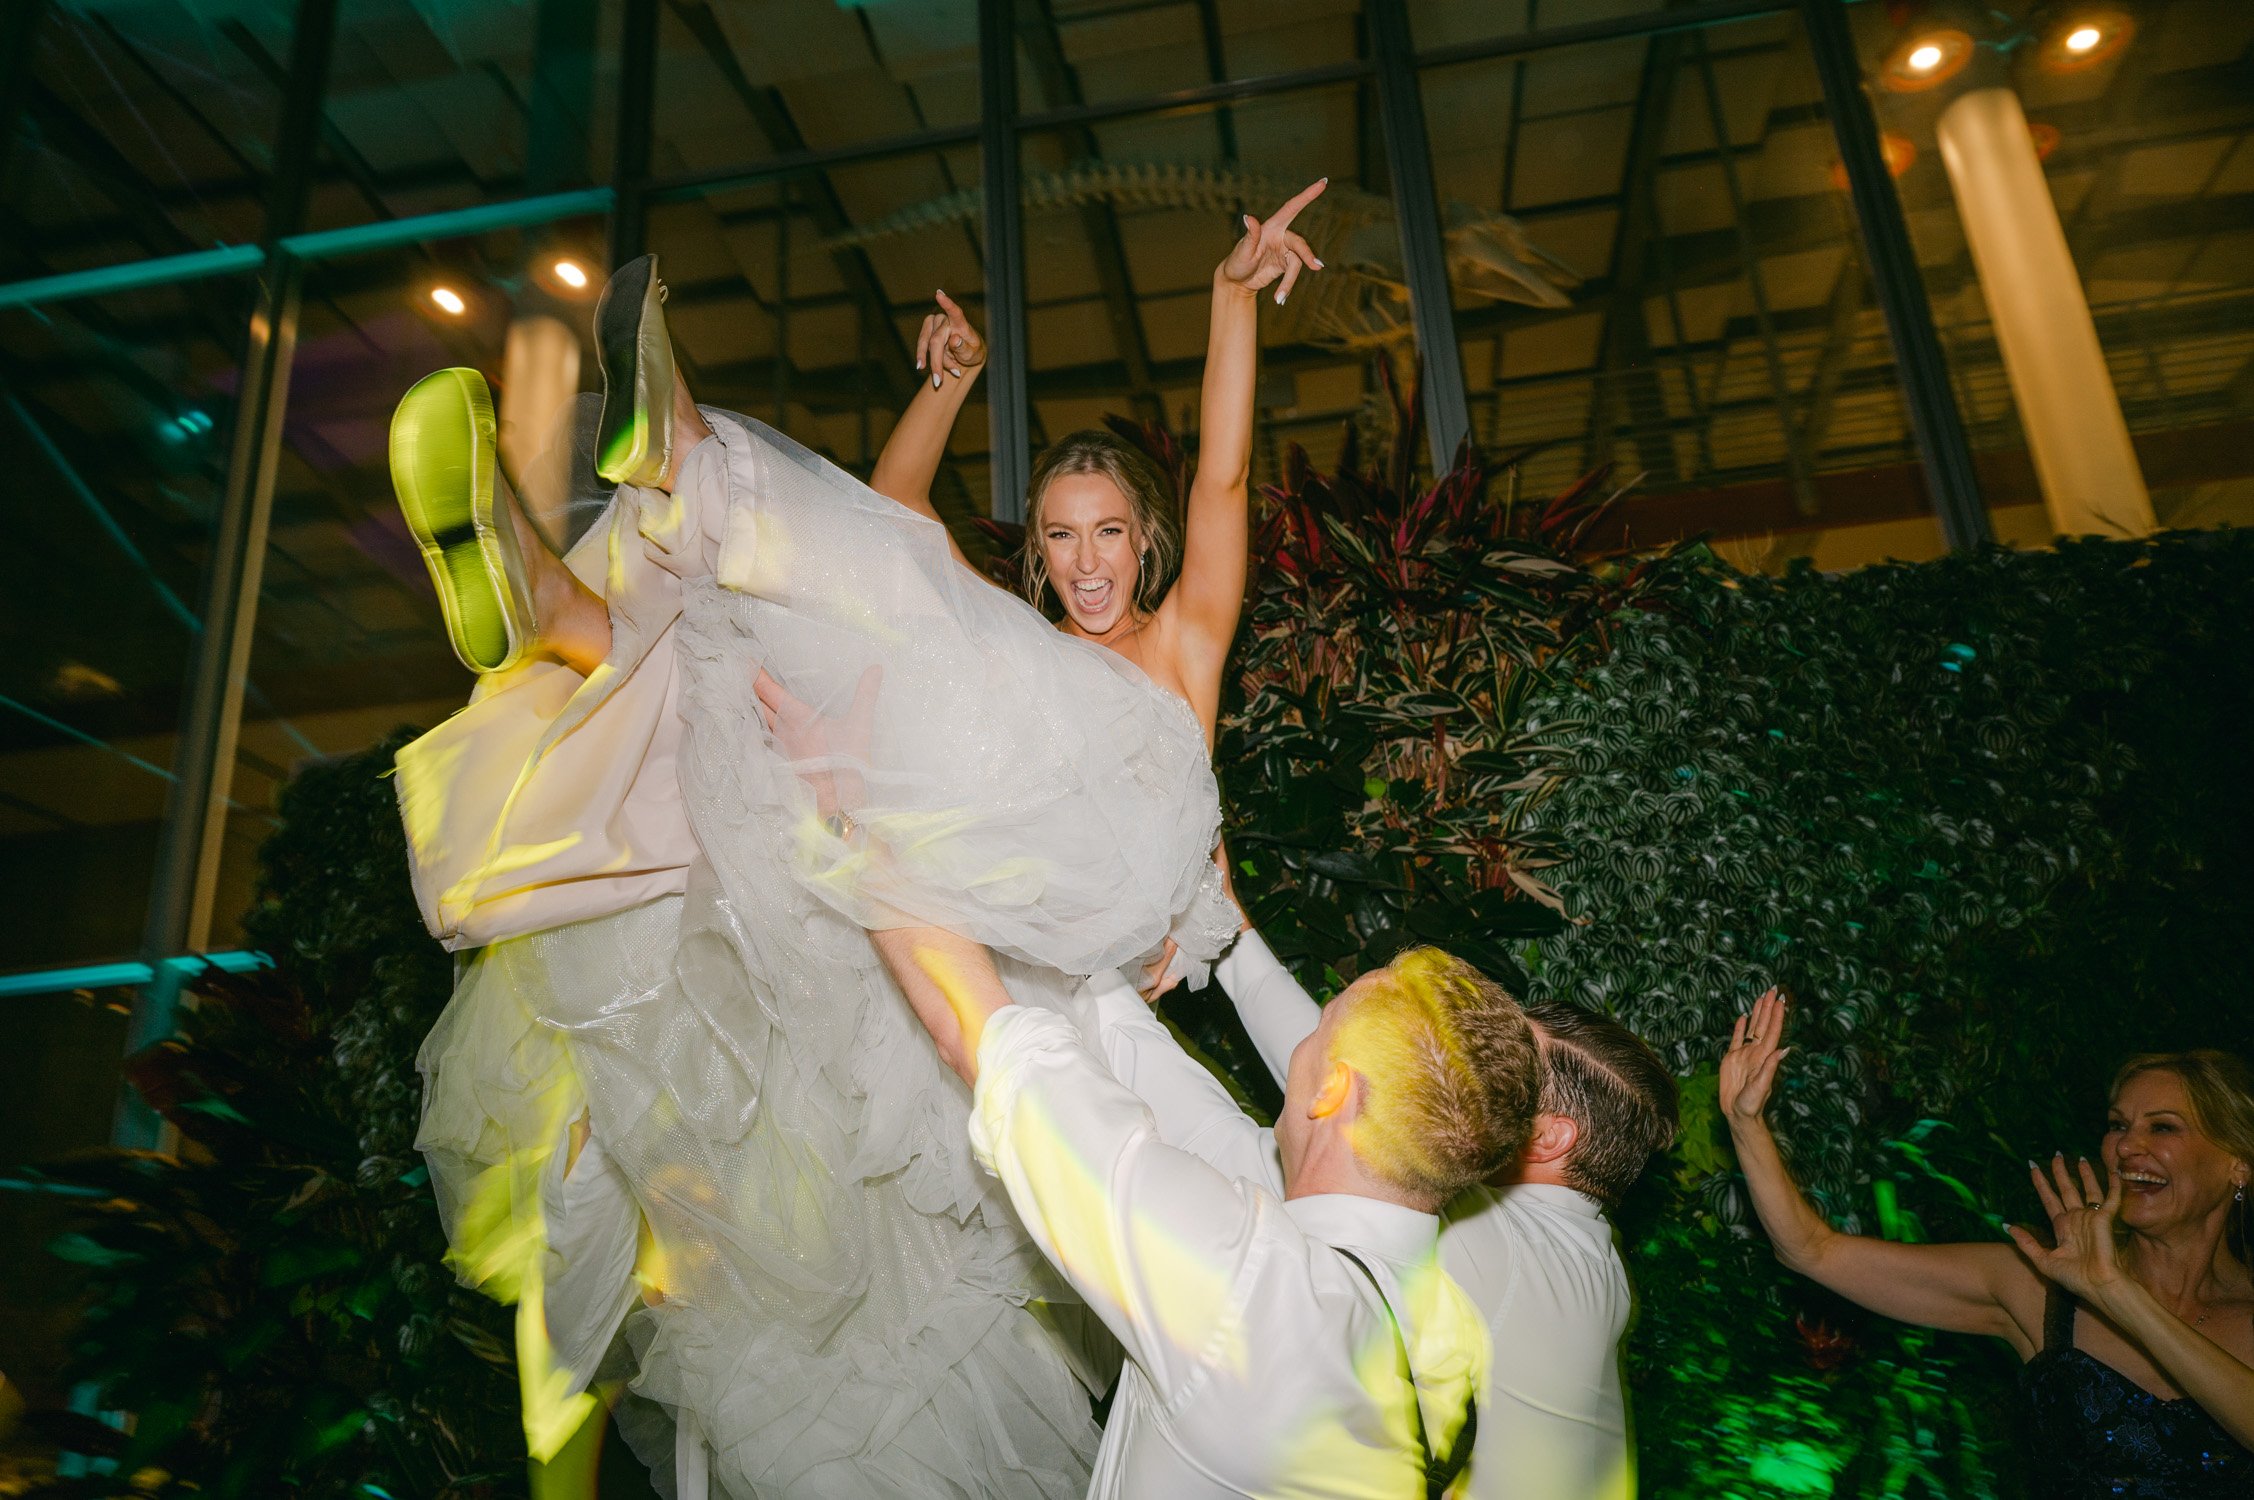 California academy of Sciences in San Francisco Wedding, photo of the bride being carried during the afterparty